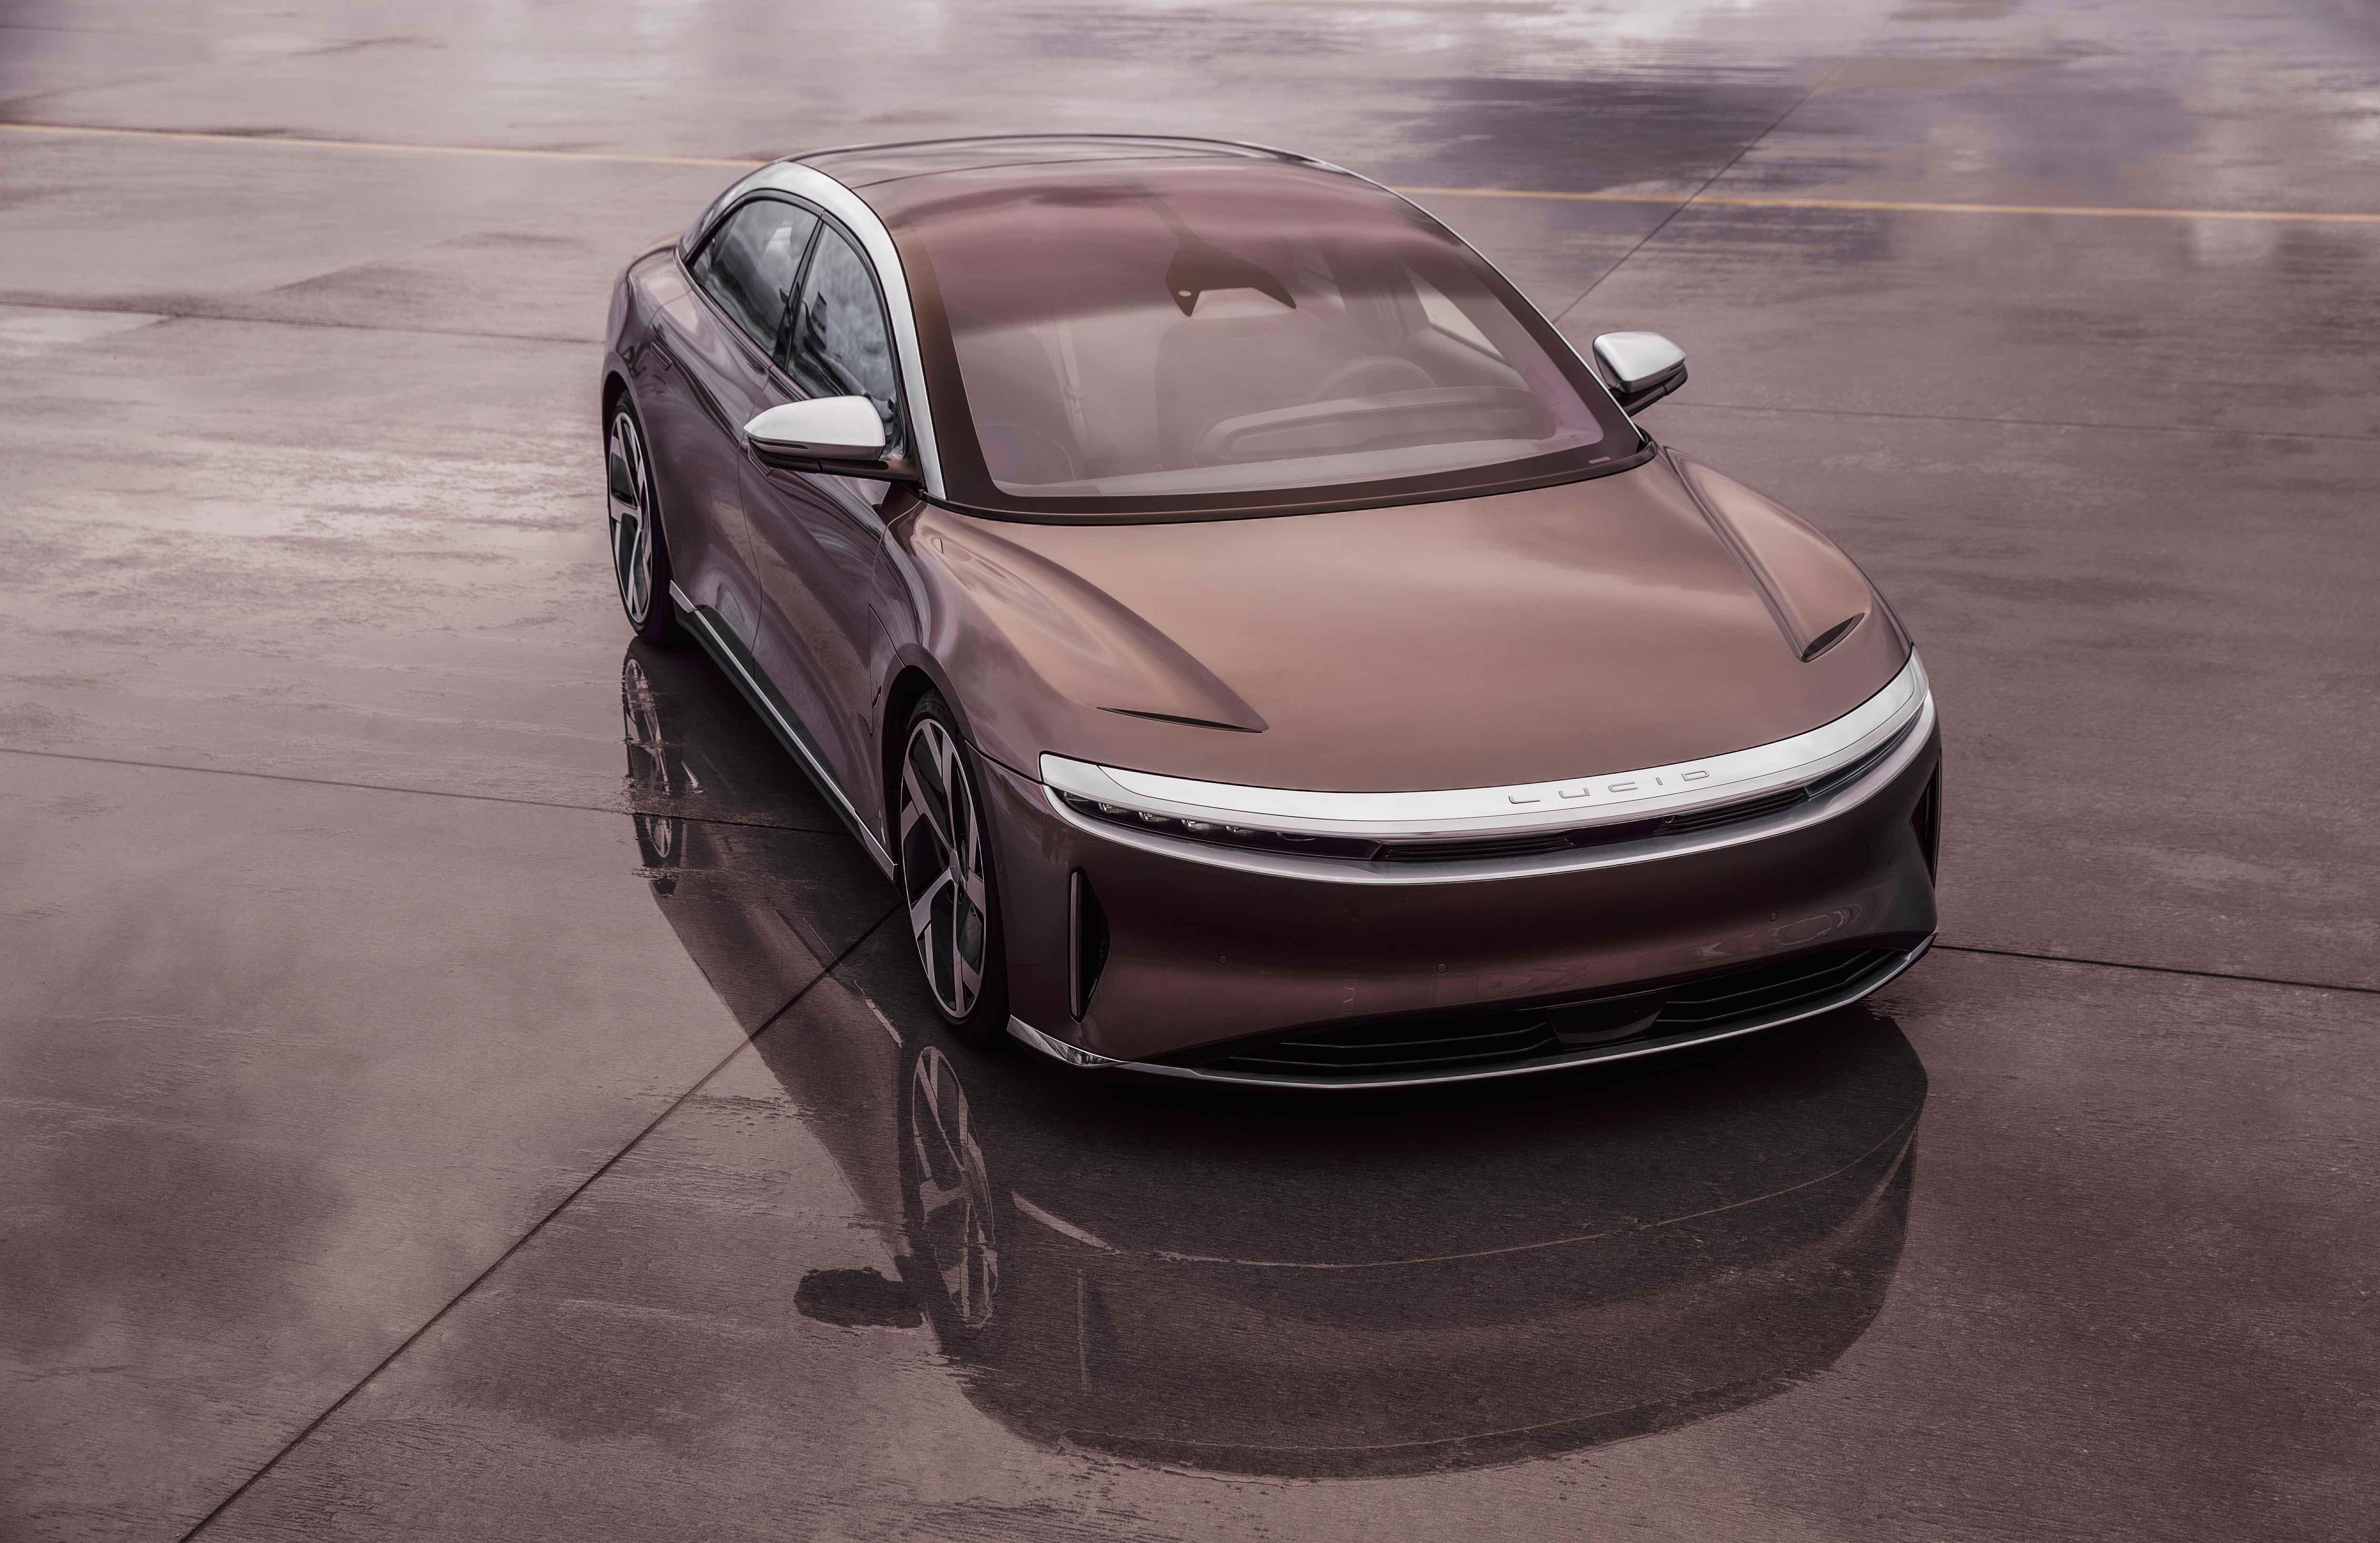 Lucid Motors Unveils Lucid Air, the World’s Most Powerful and Efficient